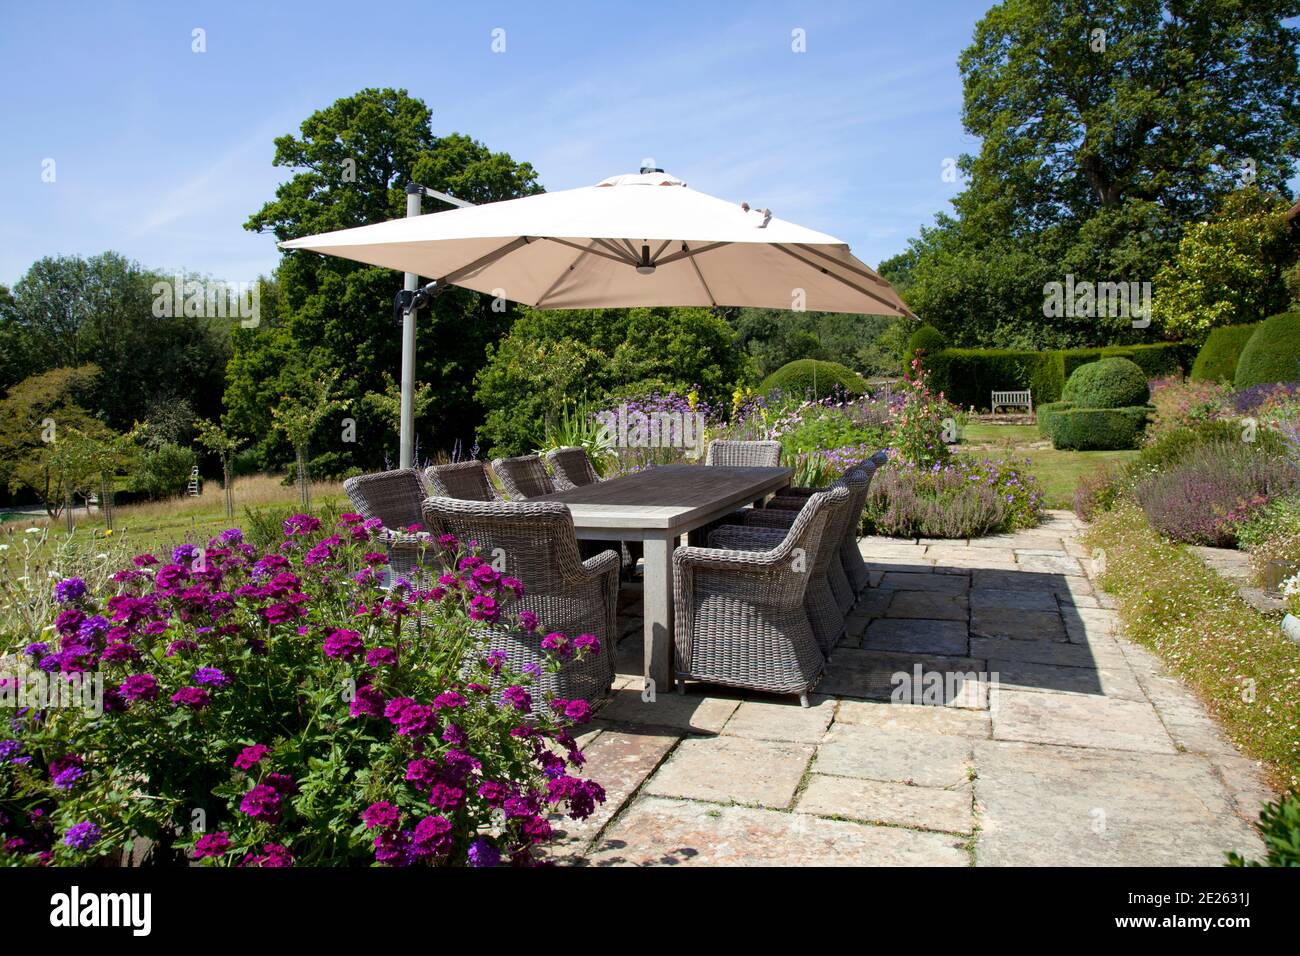 Garden terrace with large dining table and ten chairs and a large rectangular umbrella parasol with flowers, hedging and trees Stock Photo